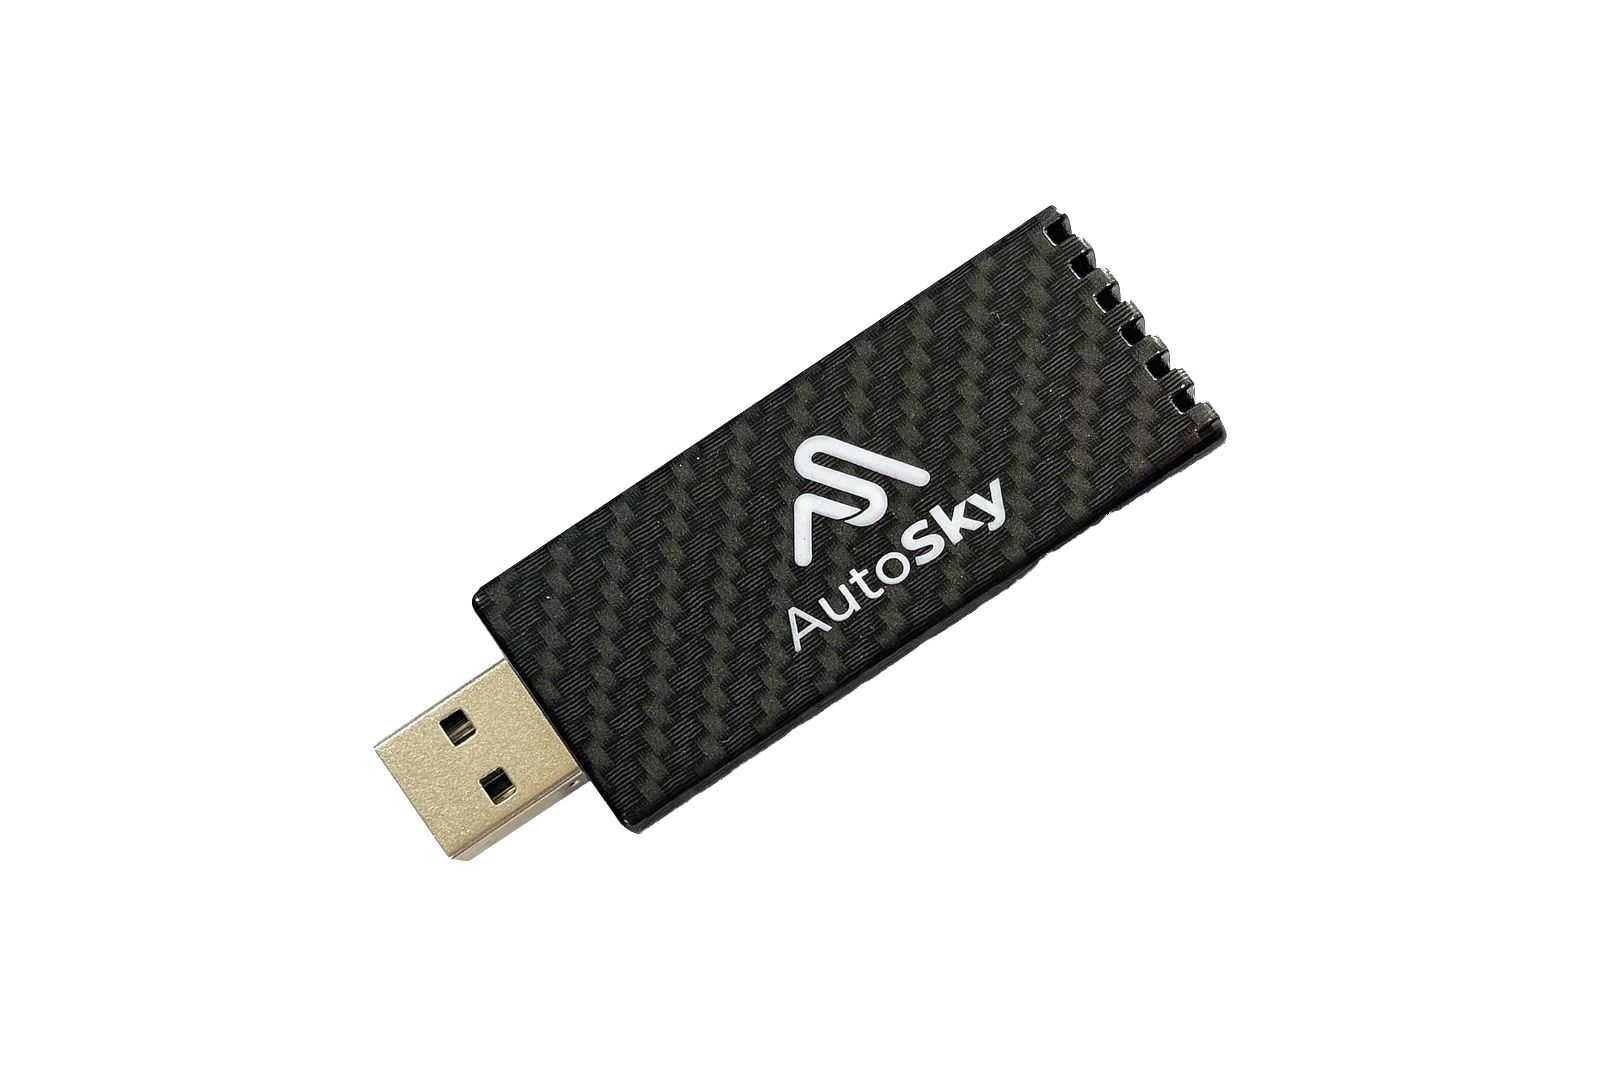 A USB dongle wrapped in a woven material.